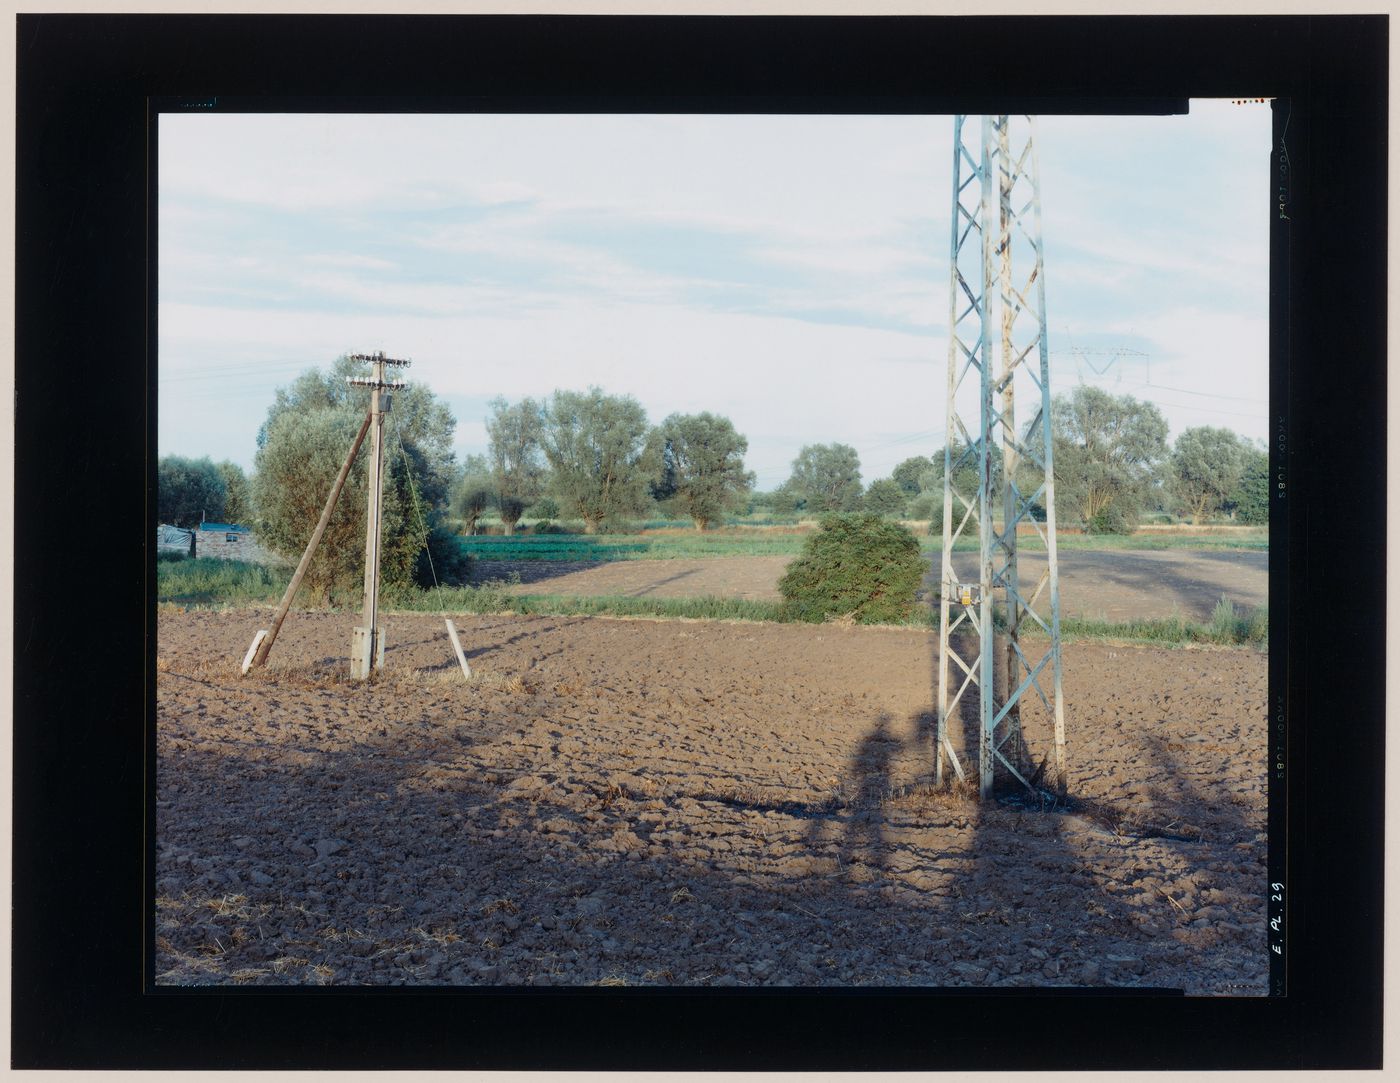 View of agricultural land, a utility pole and an electricity pylon, Gronowo, near Braniewo, Poland (from the series "In between cities")